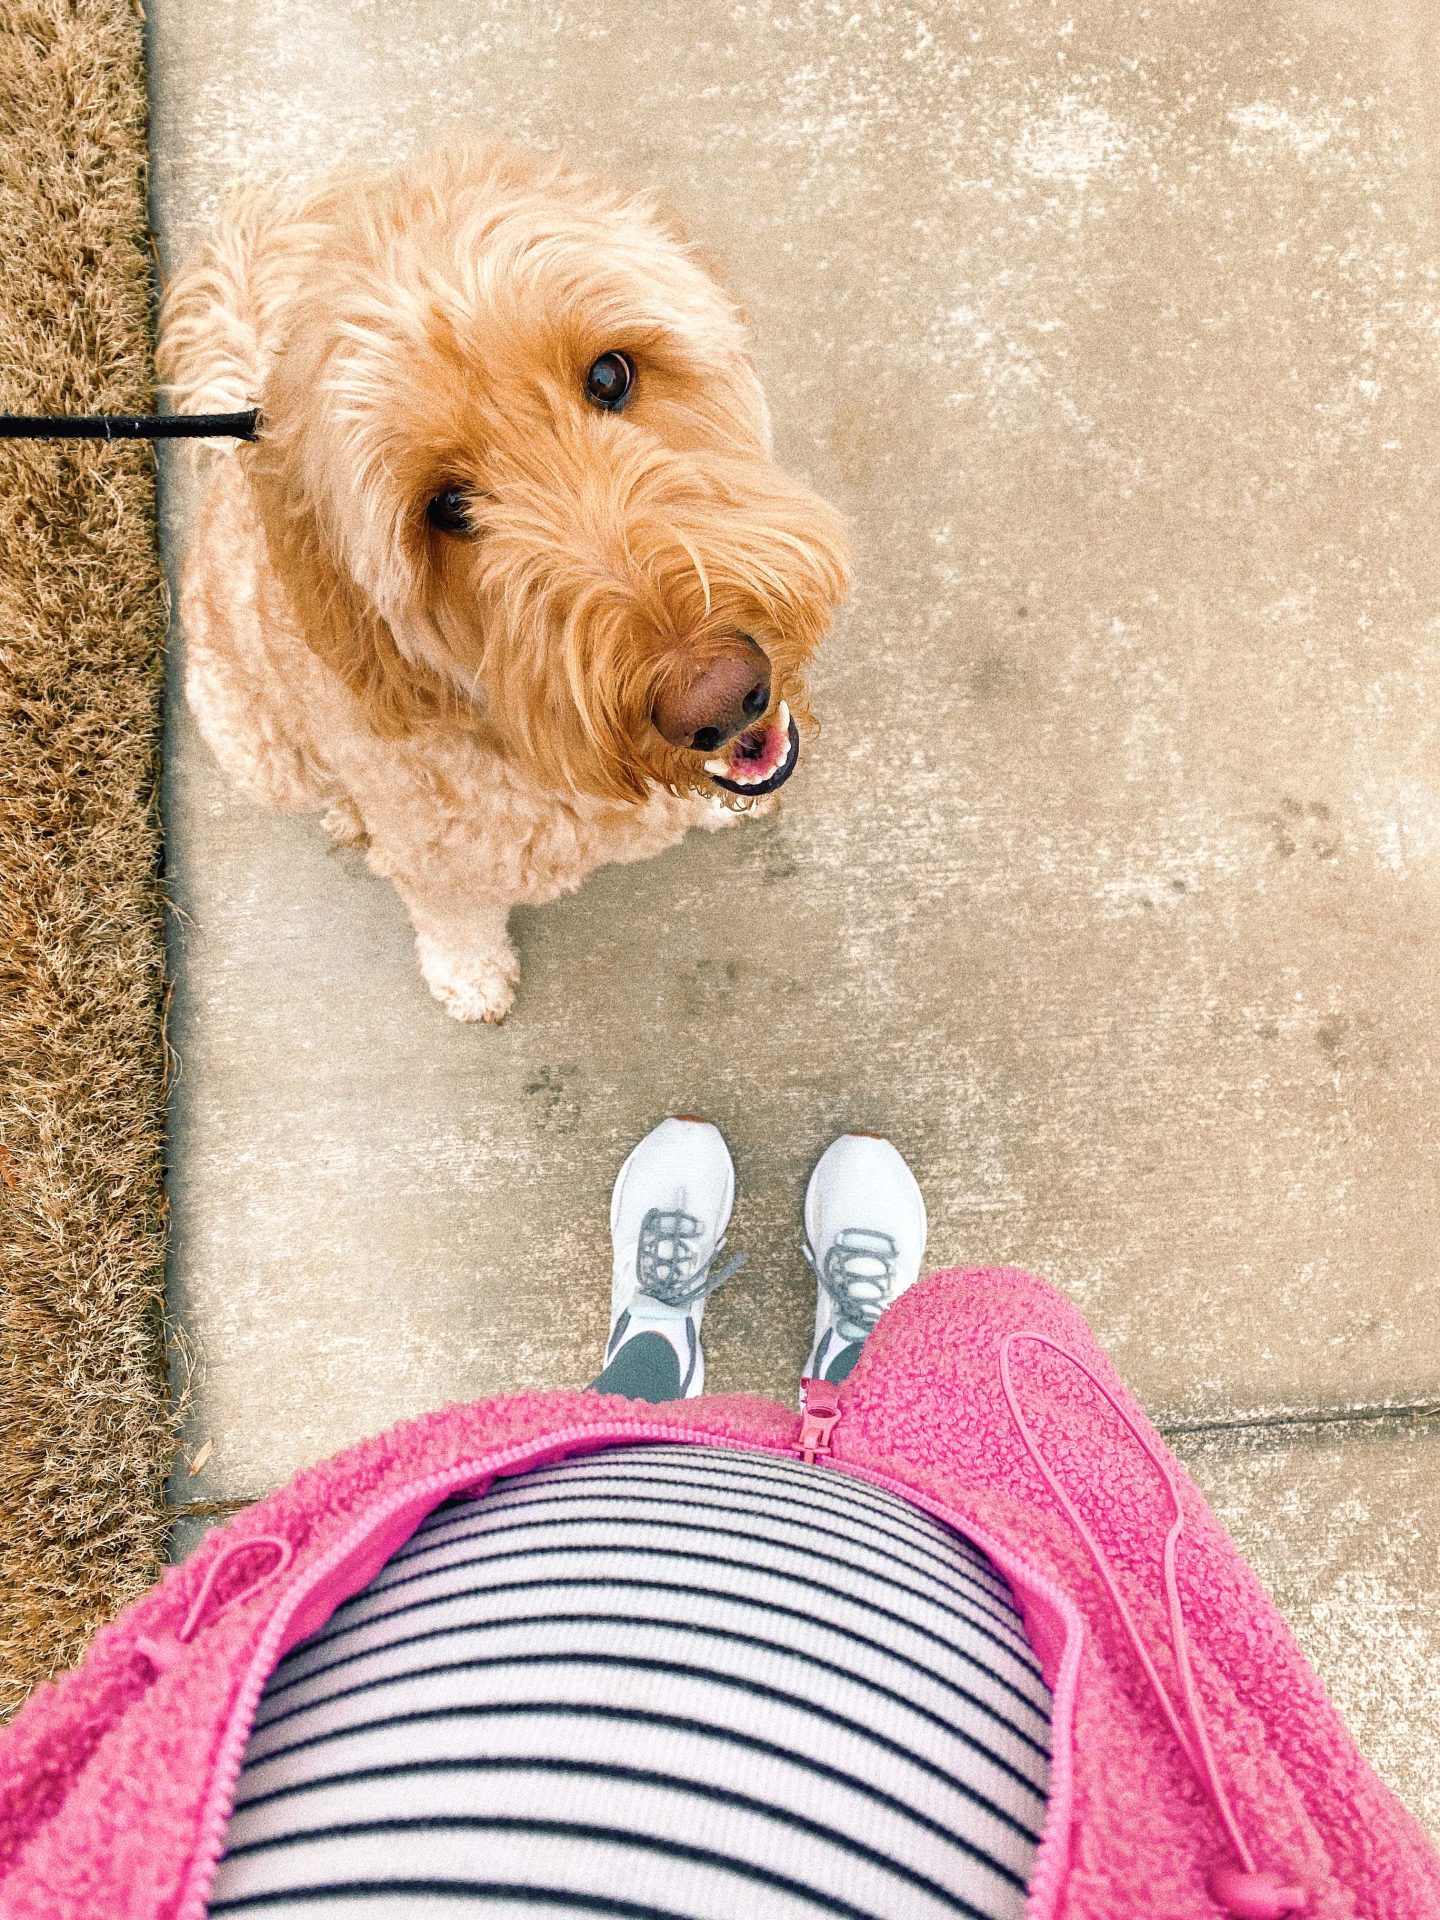 pregnancy exercises, walking the dog while pregnant